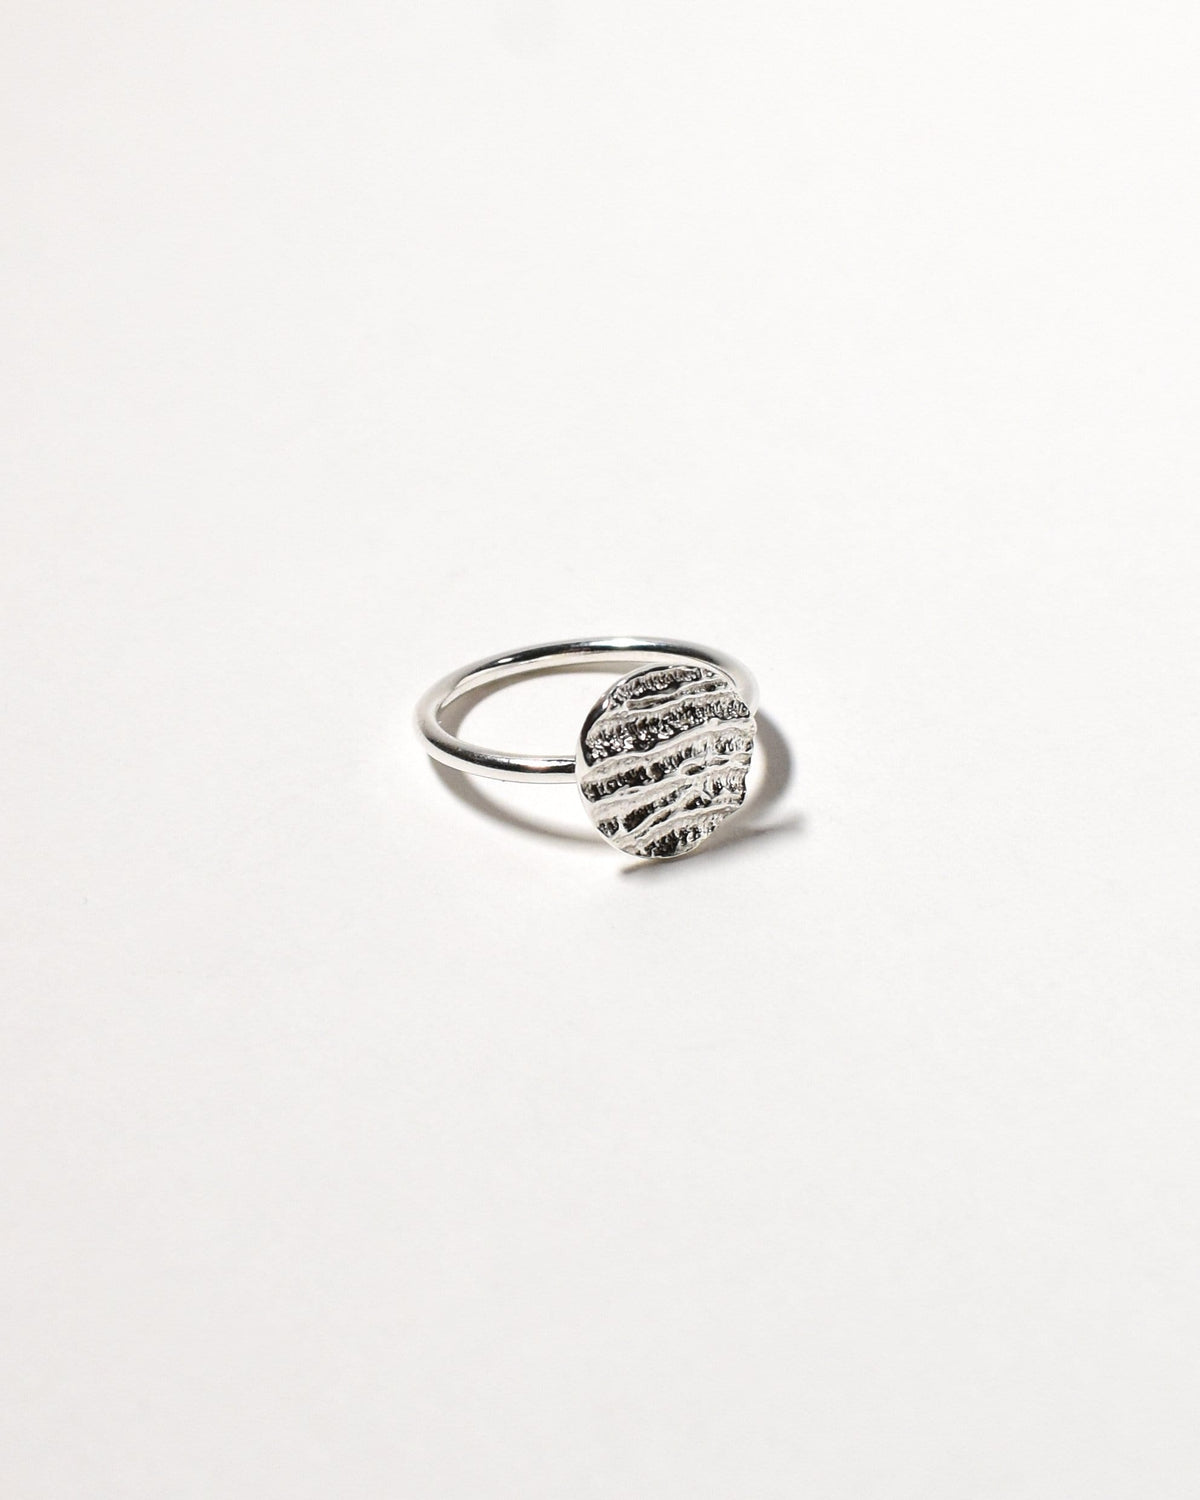 Kutti Ring (Small). Sterling Silver